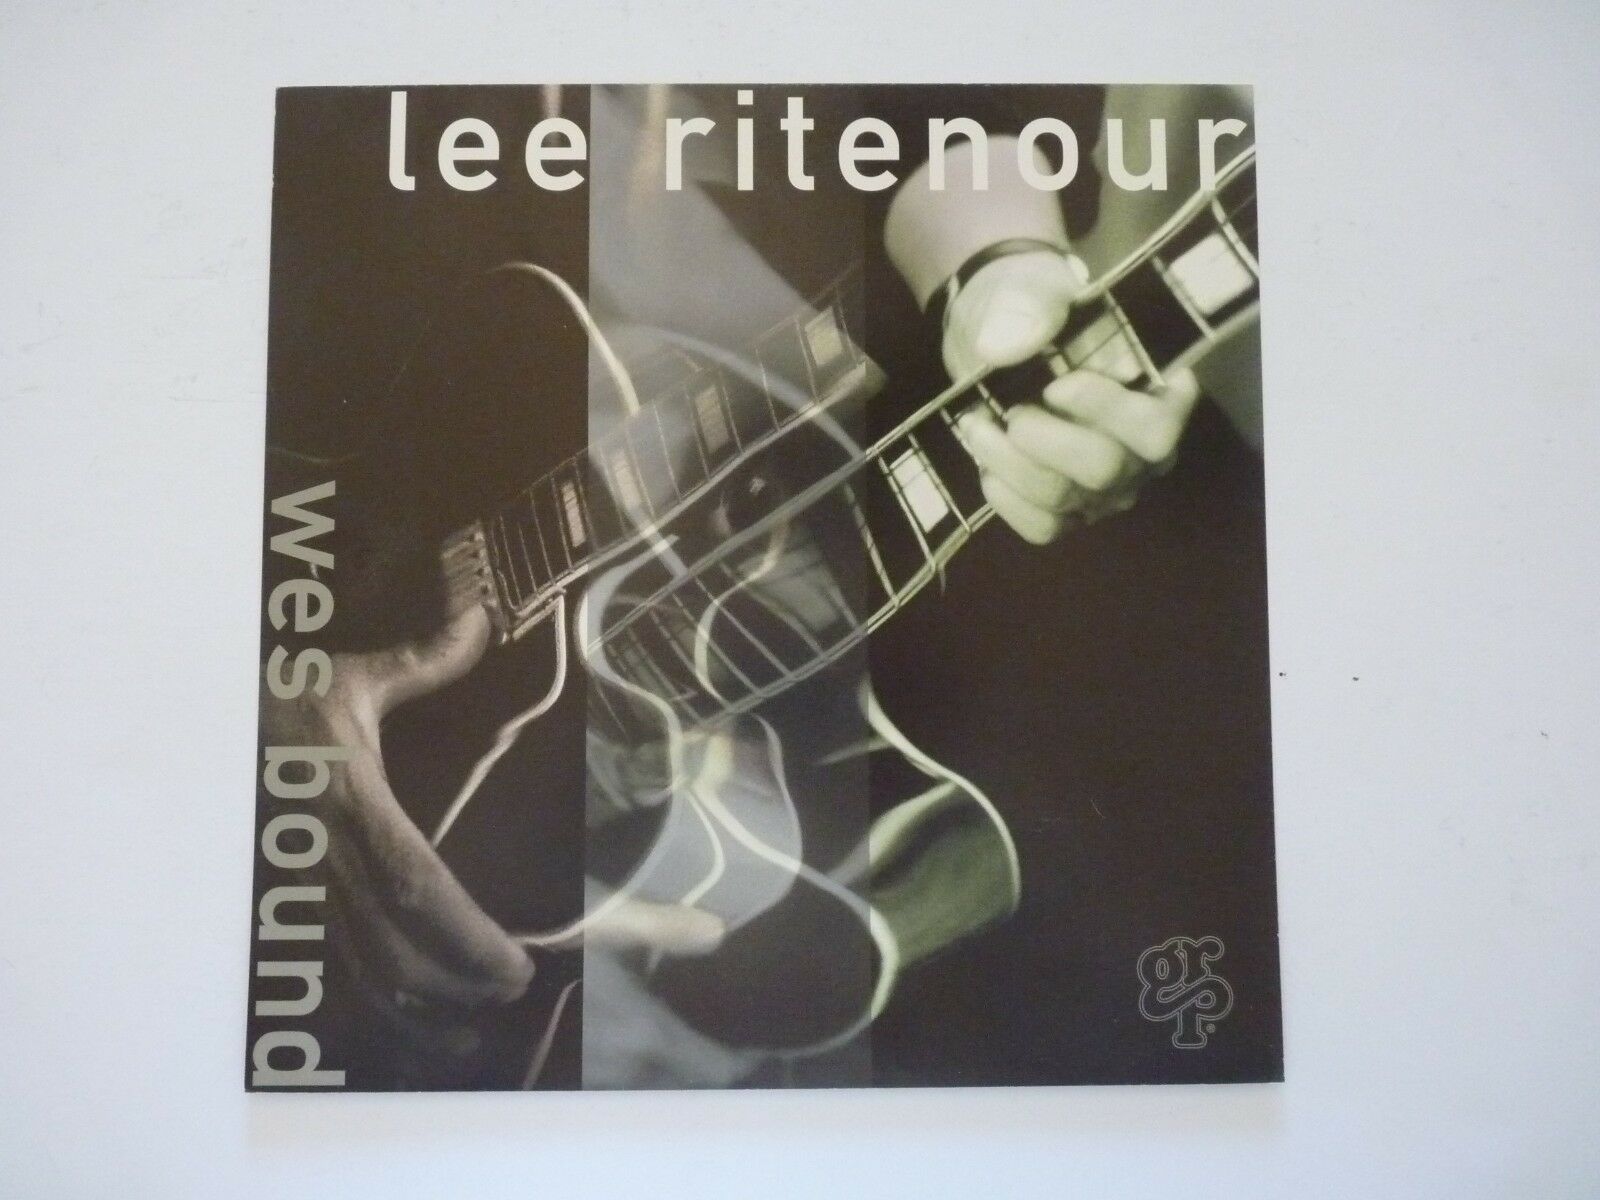 LEE RITENOUR WES BOUND LP RECORD PHOTO FLAT 12×12 POSTER COLLECTIBLE MEMORABILIA